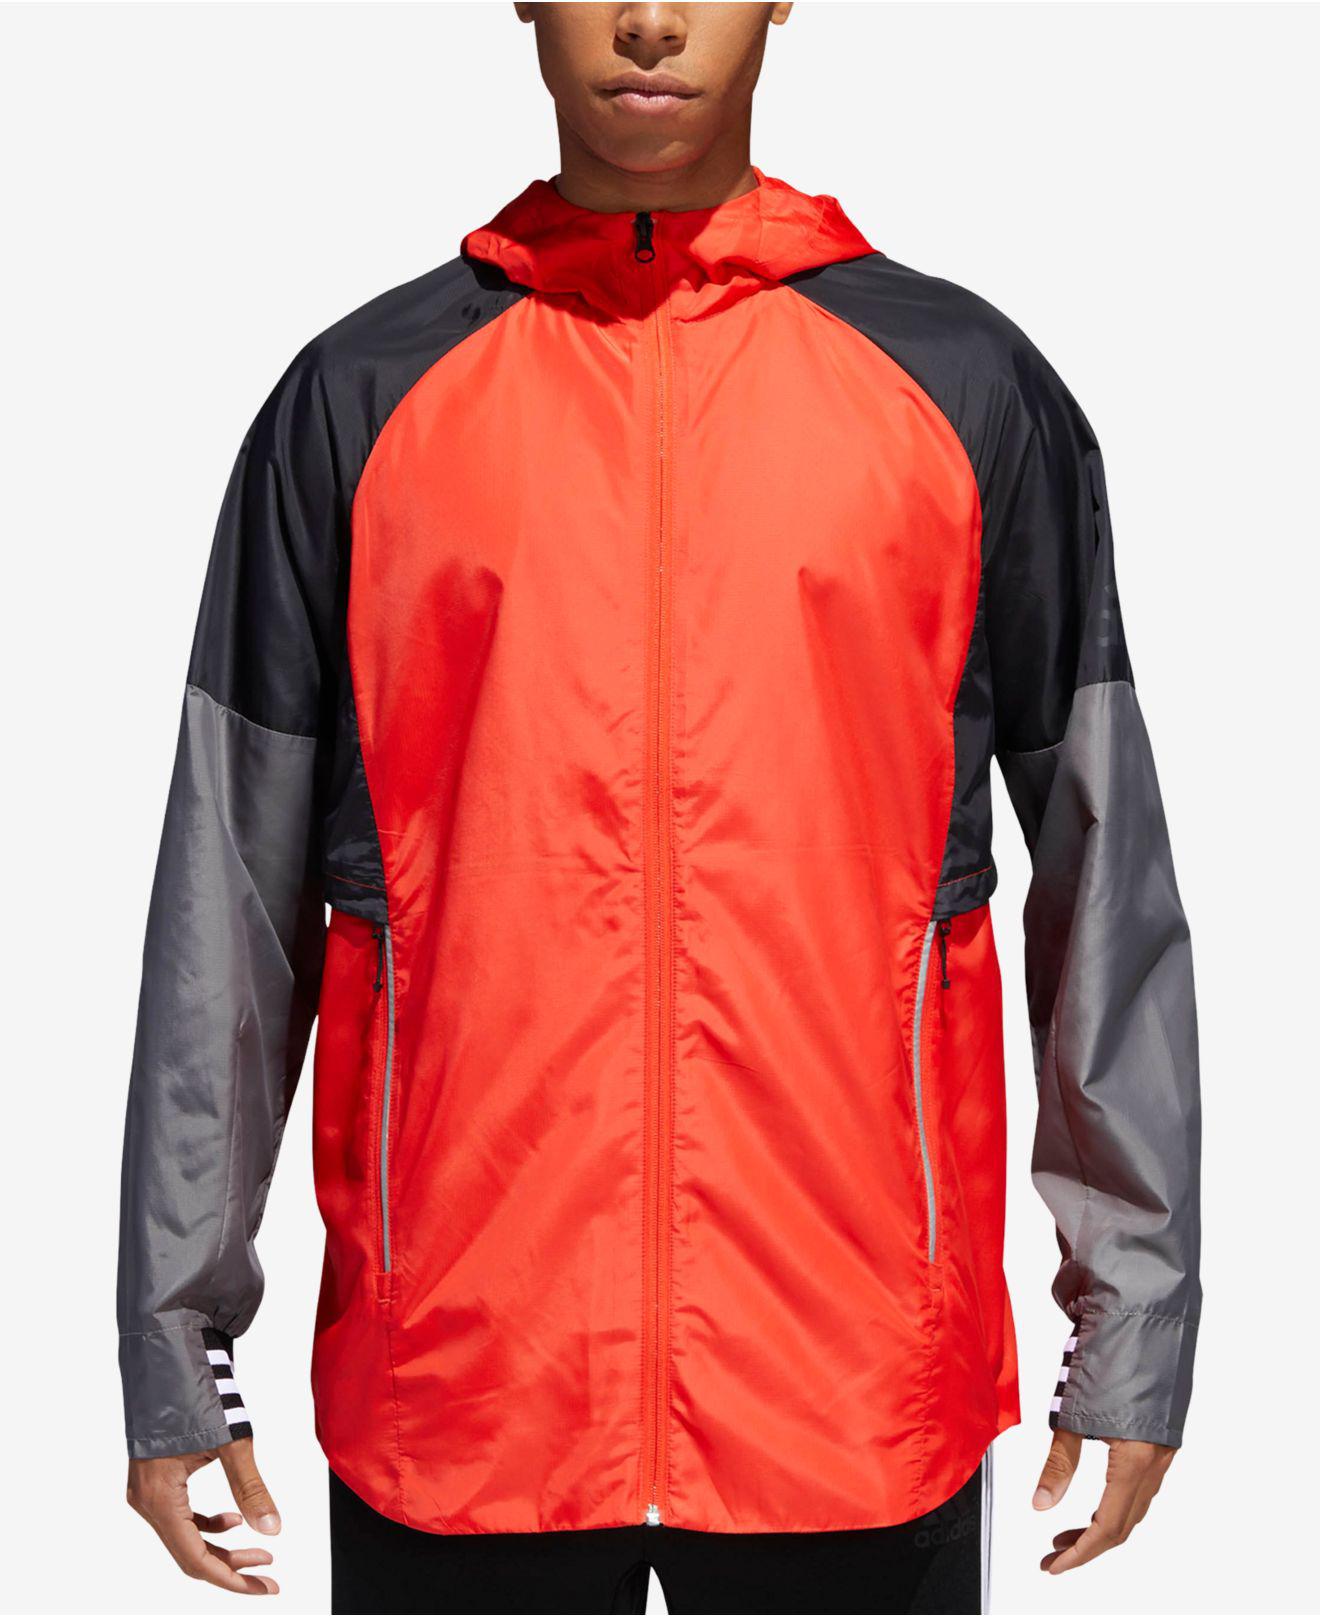 Lyst - Adidas Men's Id Hooded Jacket in Red for Men